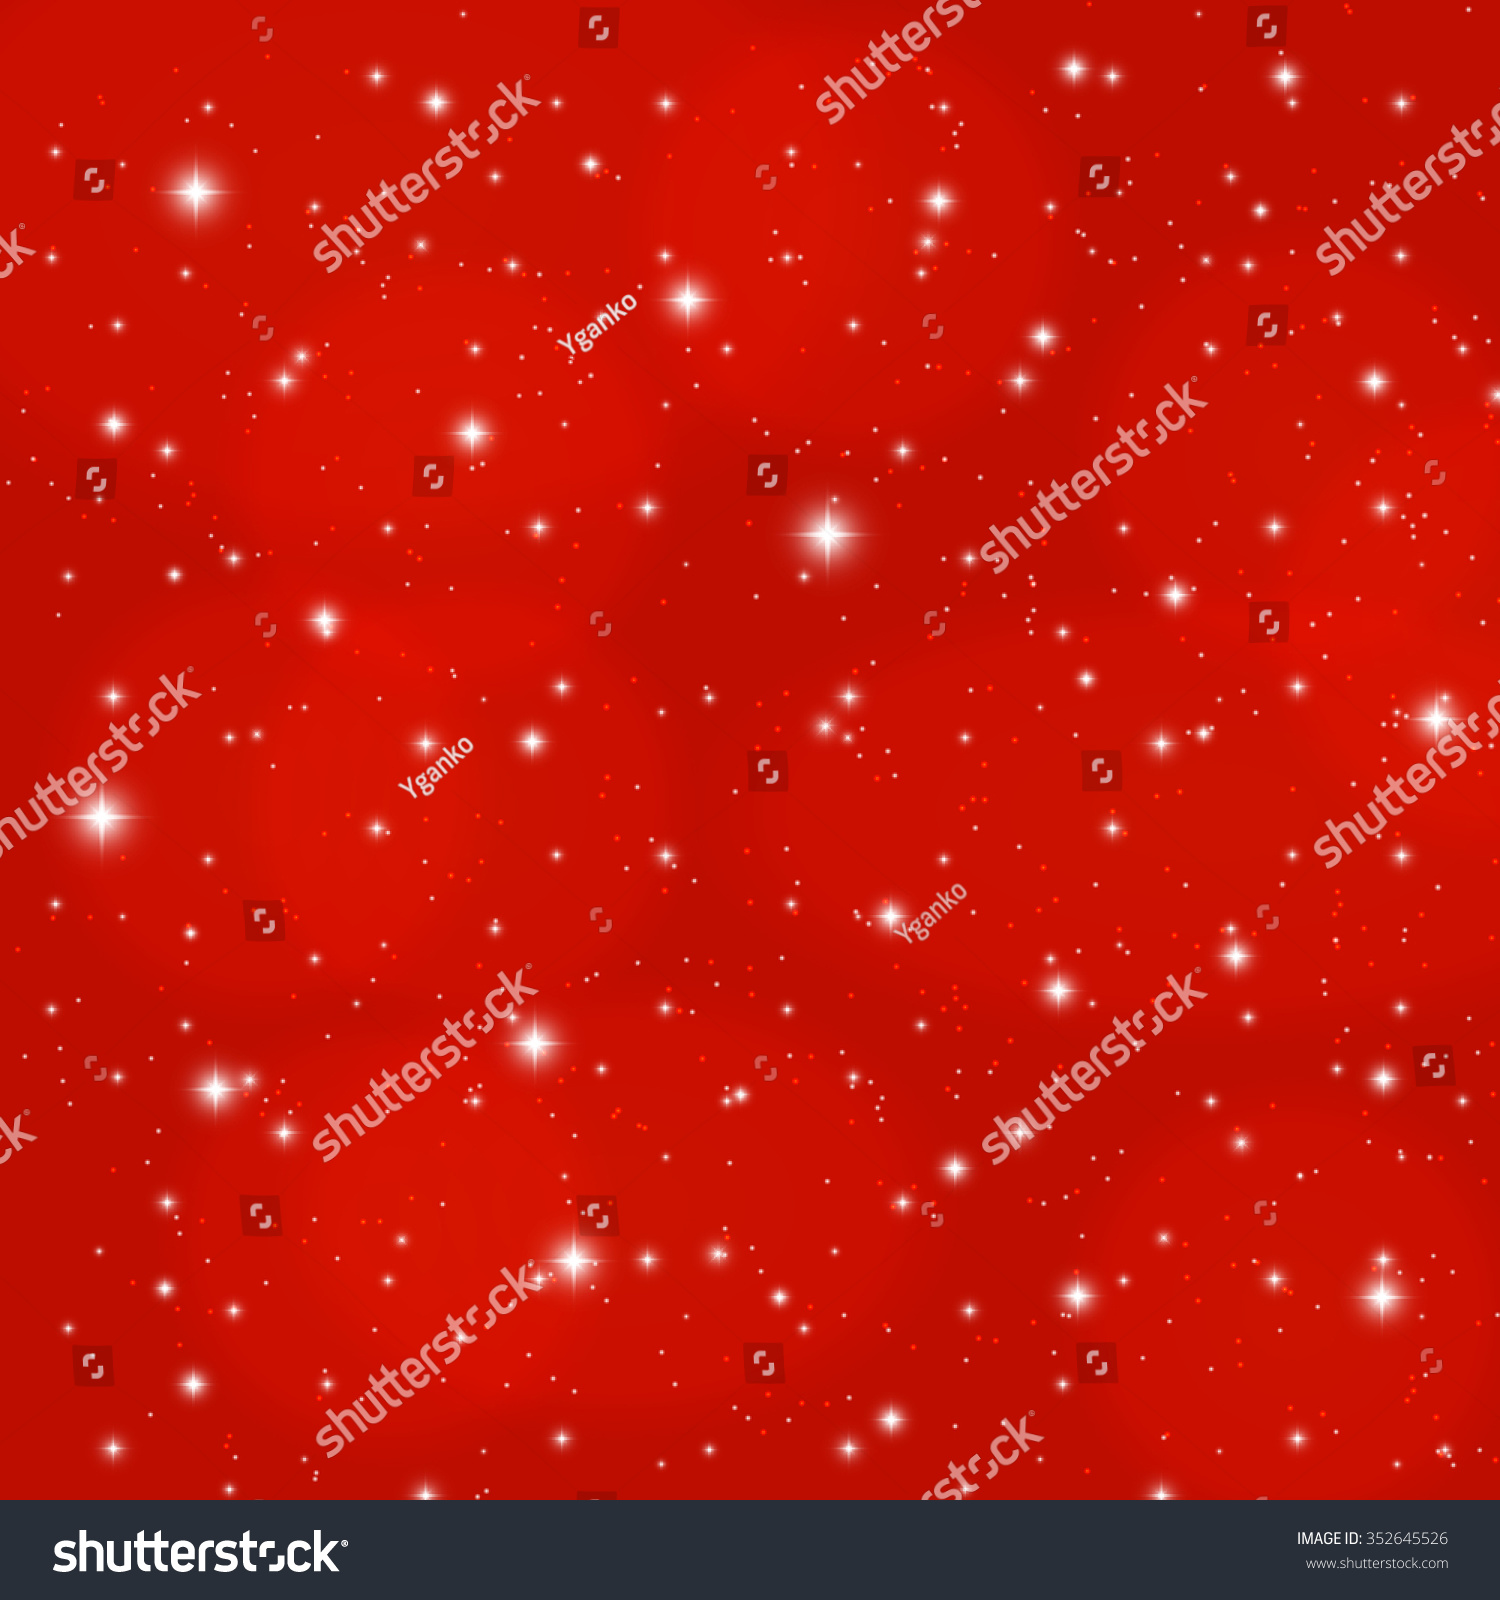 Beautiful Star Sky Illustration On Red Background - 352645526 ...